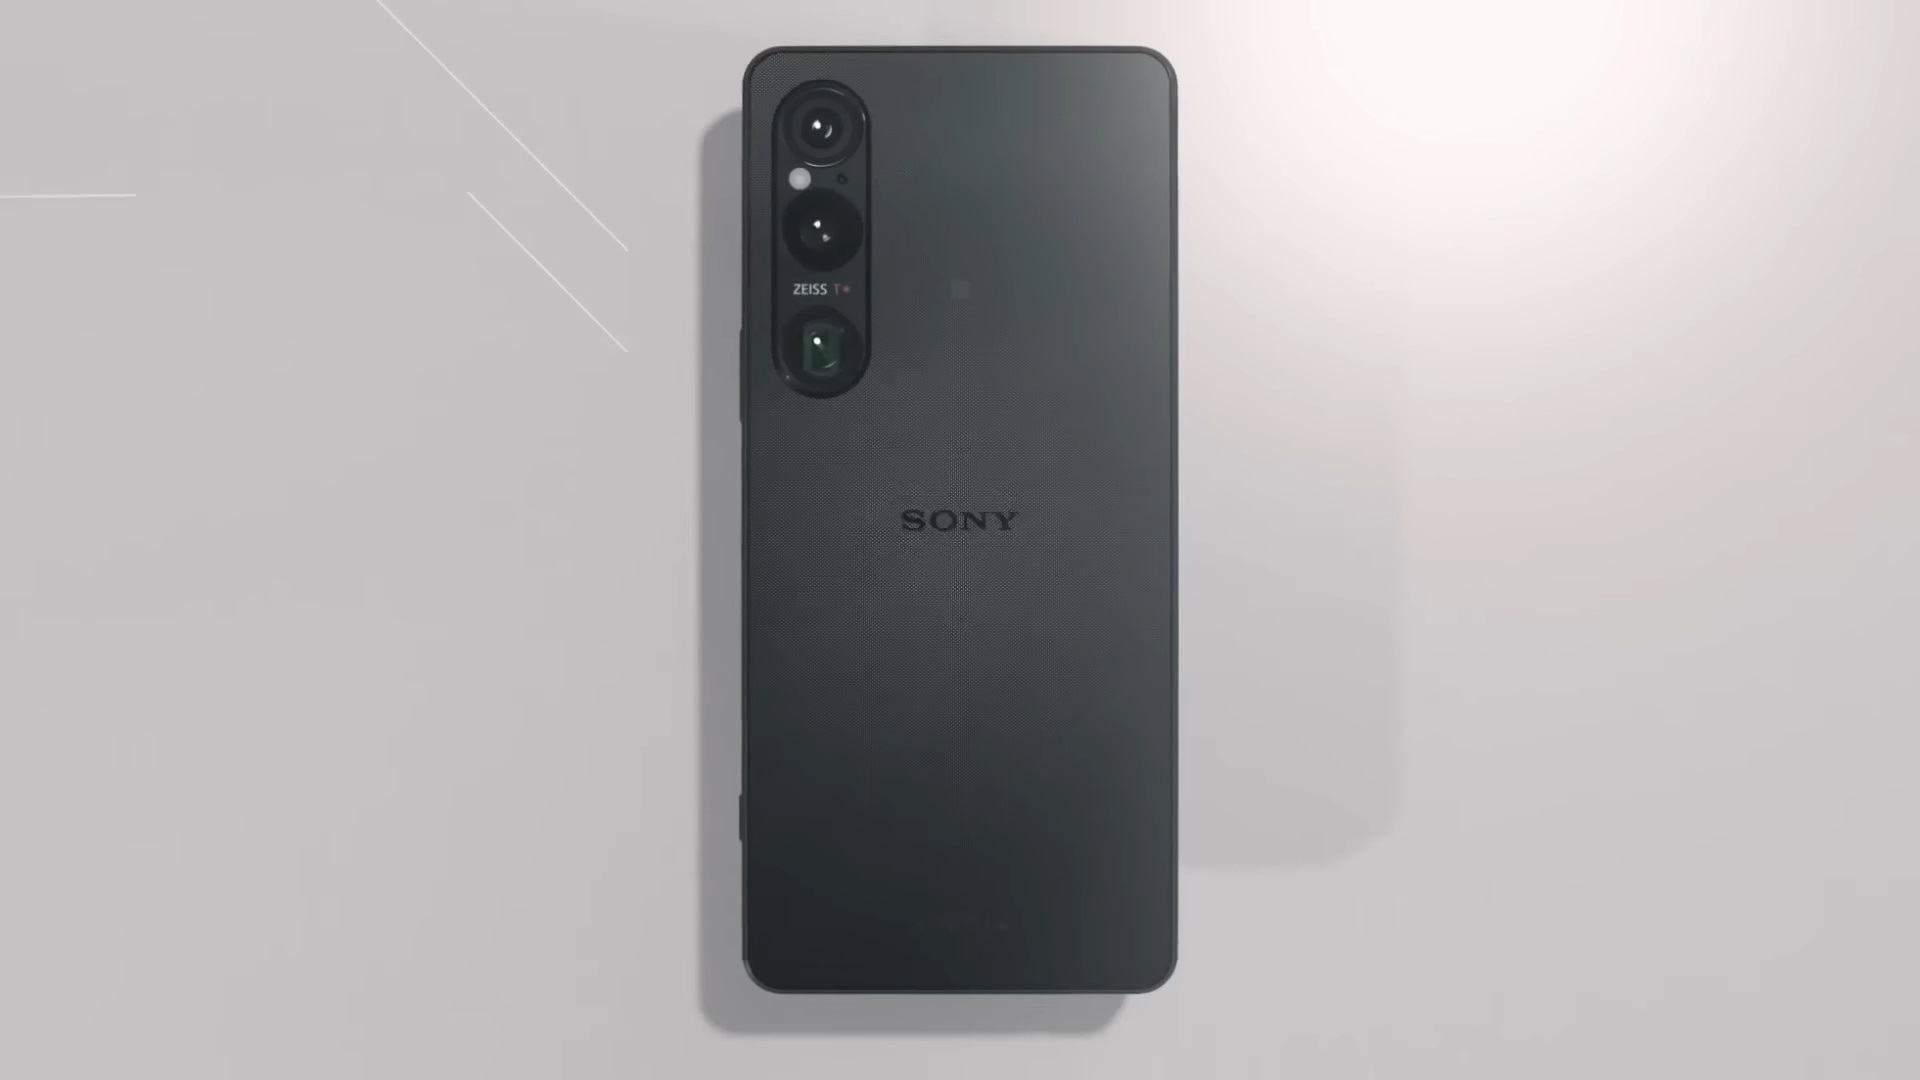 Promotional videos for the Sony Xperia 1 VI and Xperia 10 VI